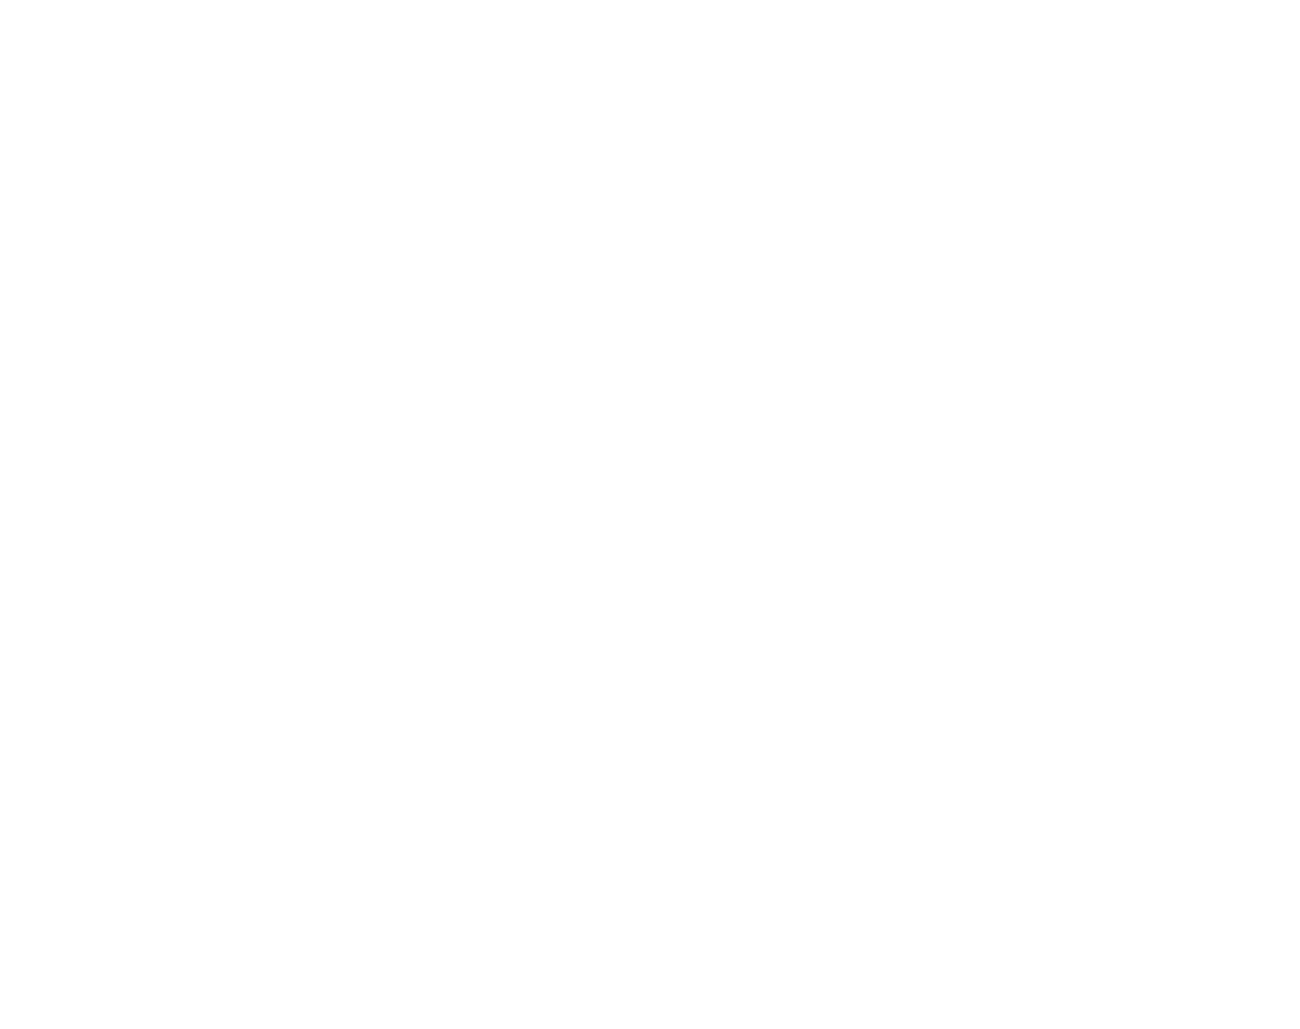 Stockpot Collective